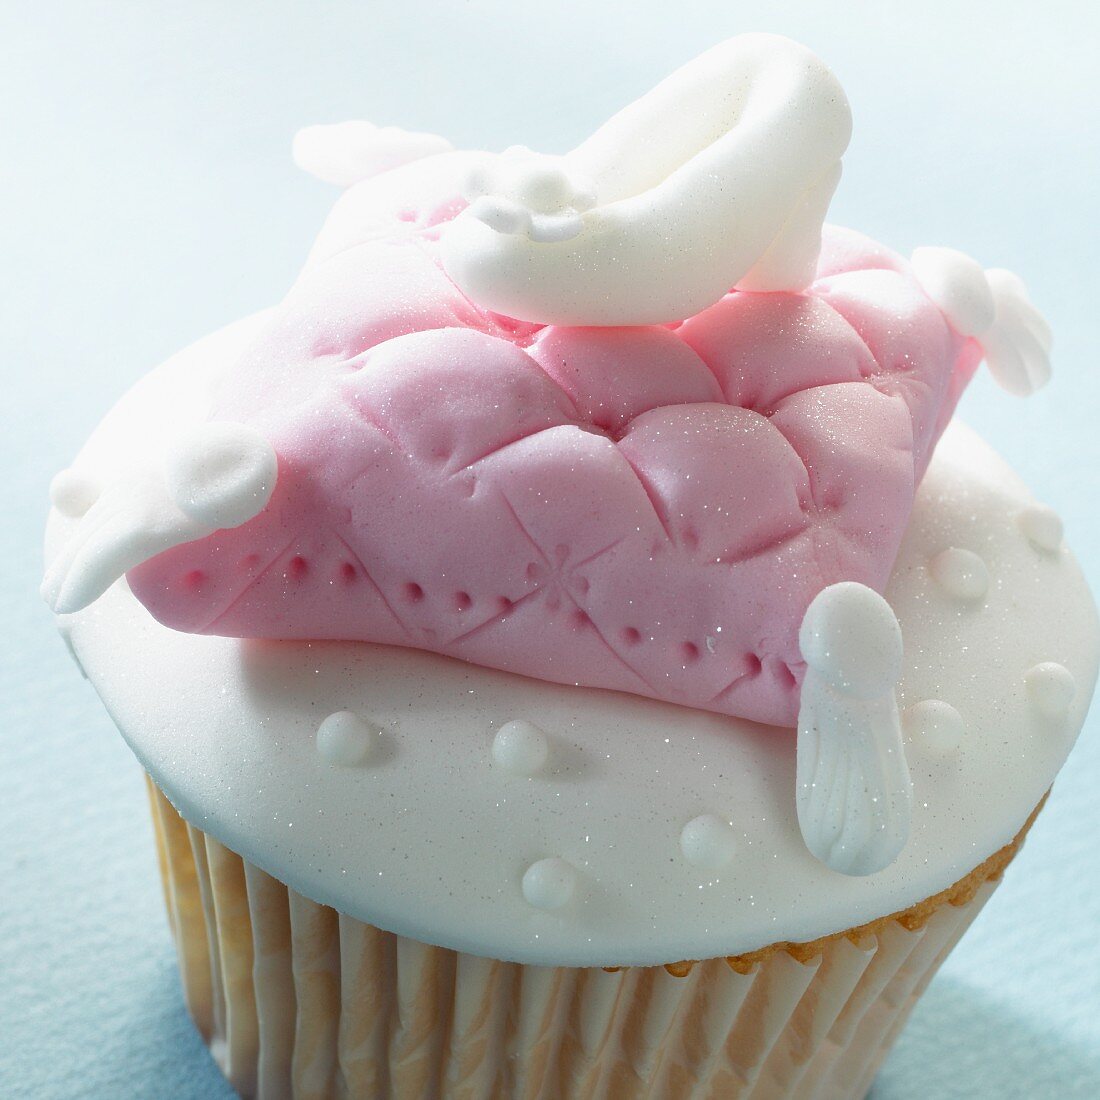 A cupcake with a fairytale decoration